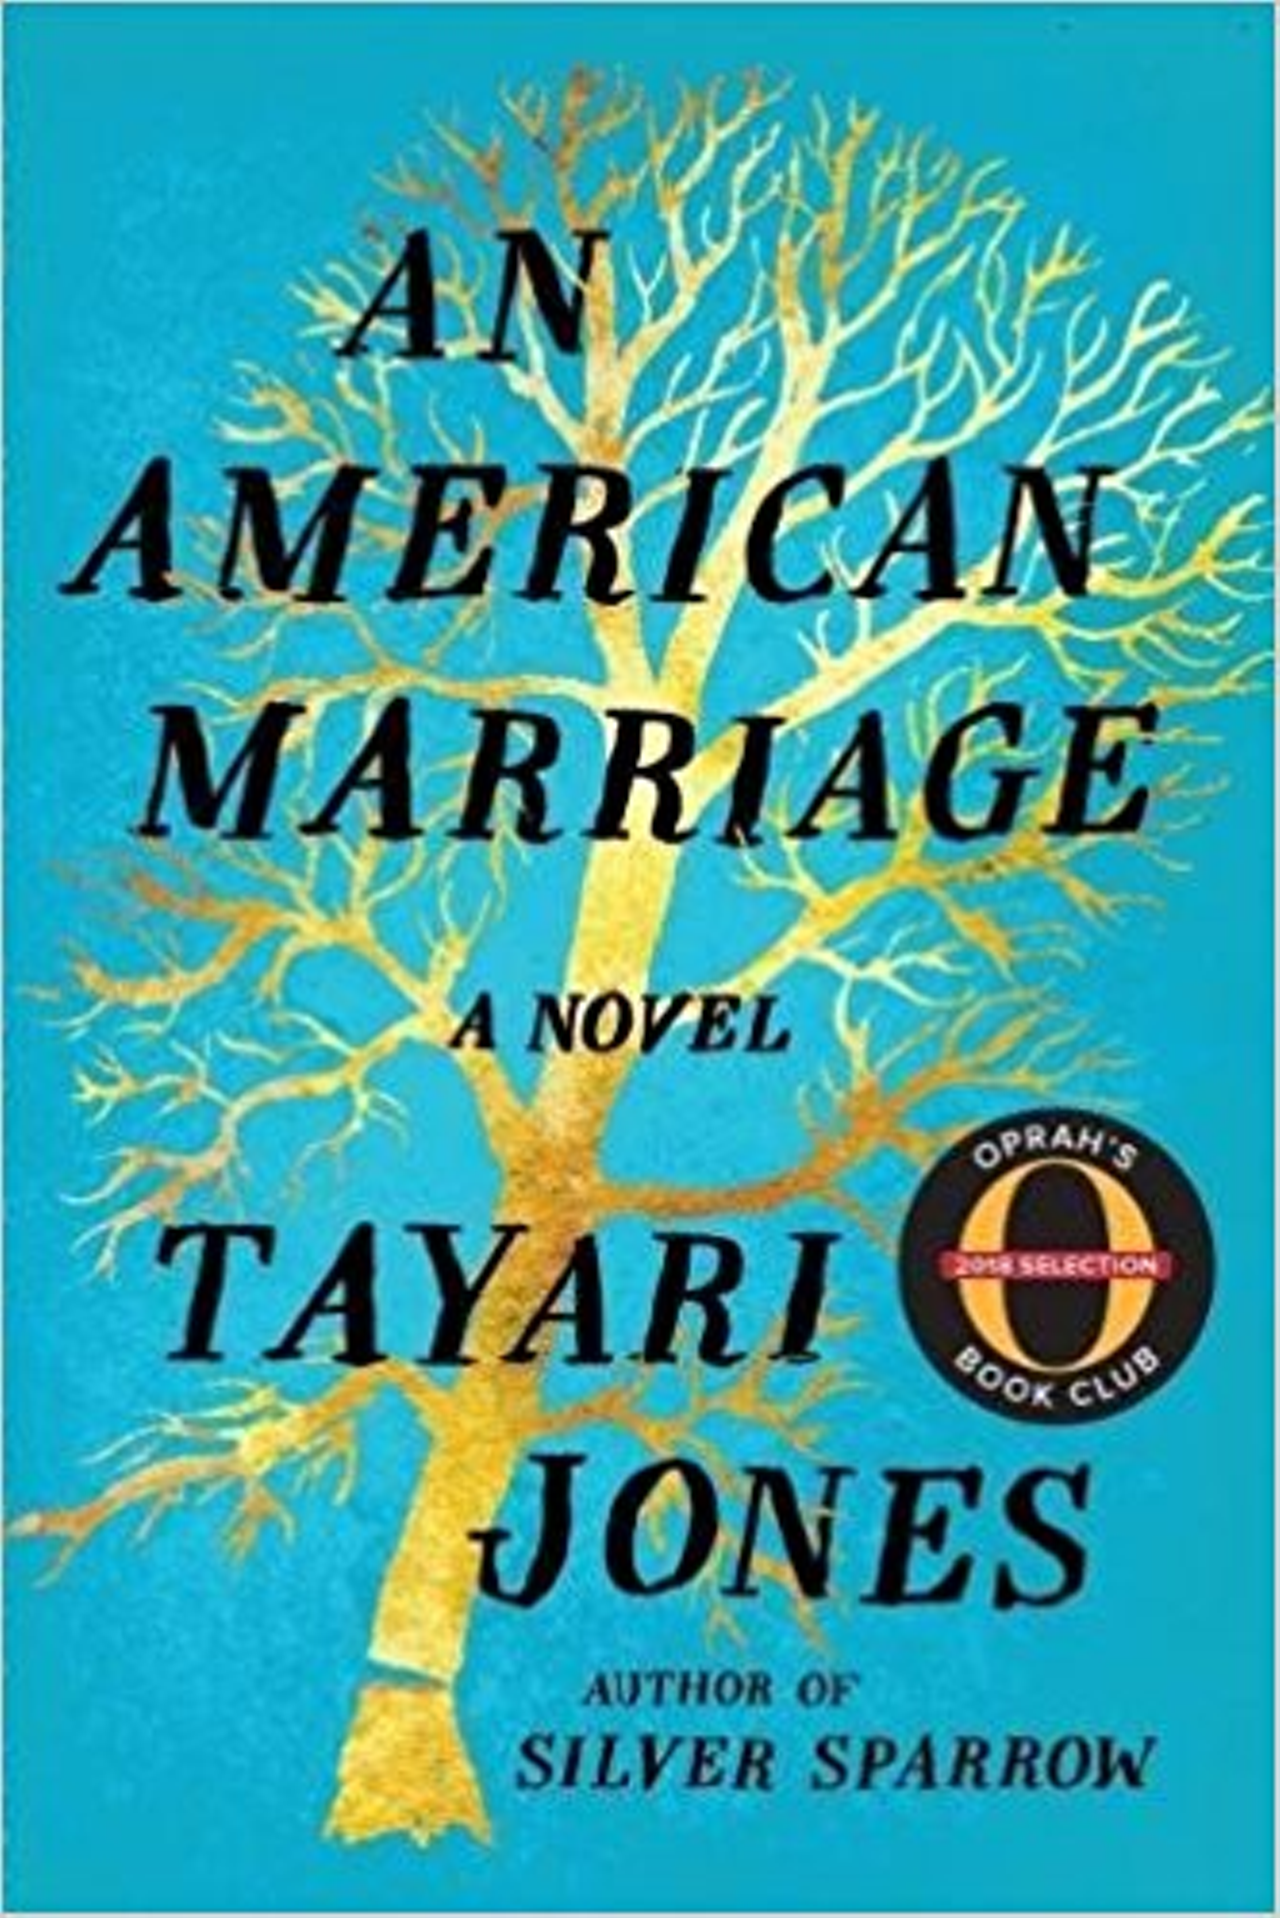 "This book was my favorite of 2018 — you can’t put it down. This book will hold your attention from page one. Beautifully written, 'An American Marriage' will give you the entire range of emotions, but its real brilliance is in the storytelling. When characters Celestial and Roy are in the wrong place at the wrong time, Roy gets arrested and goes to prison for a crime he did not commit. Jones makes every character explode off the page as you feel with them and for them. This book tackles hard topics like the prison industrial complex, racism and classism, and Jones expertly maneuvers the plot and characters like a chess master keeping the reader wanting more. Filled with heartbreak, regret, love and hope, this is a book you won’t want to end." — Ella Mulford, popular library department manager, Cincinnati main library